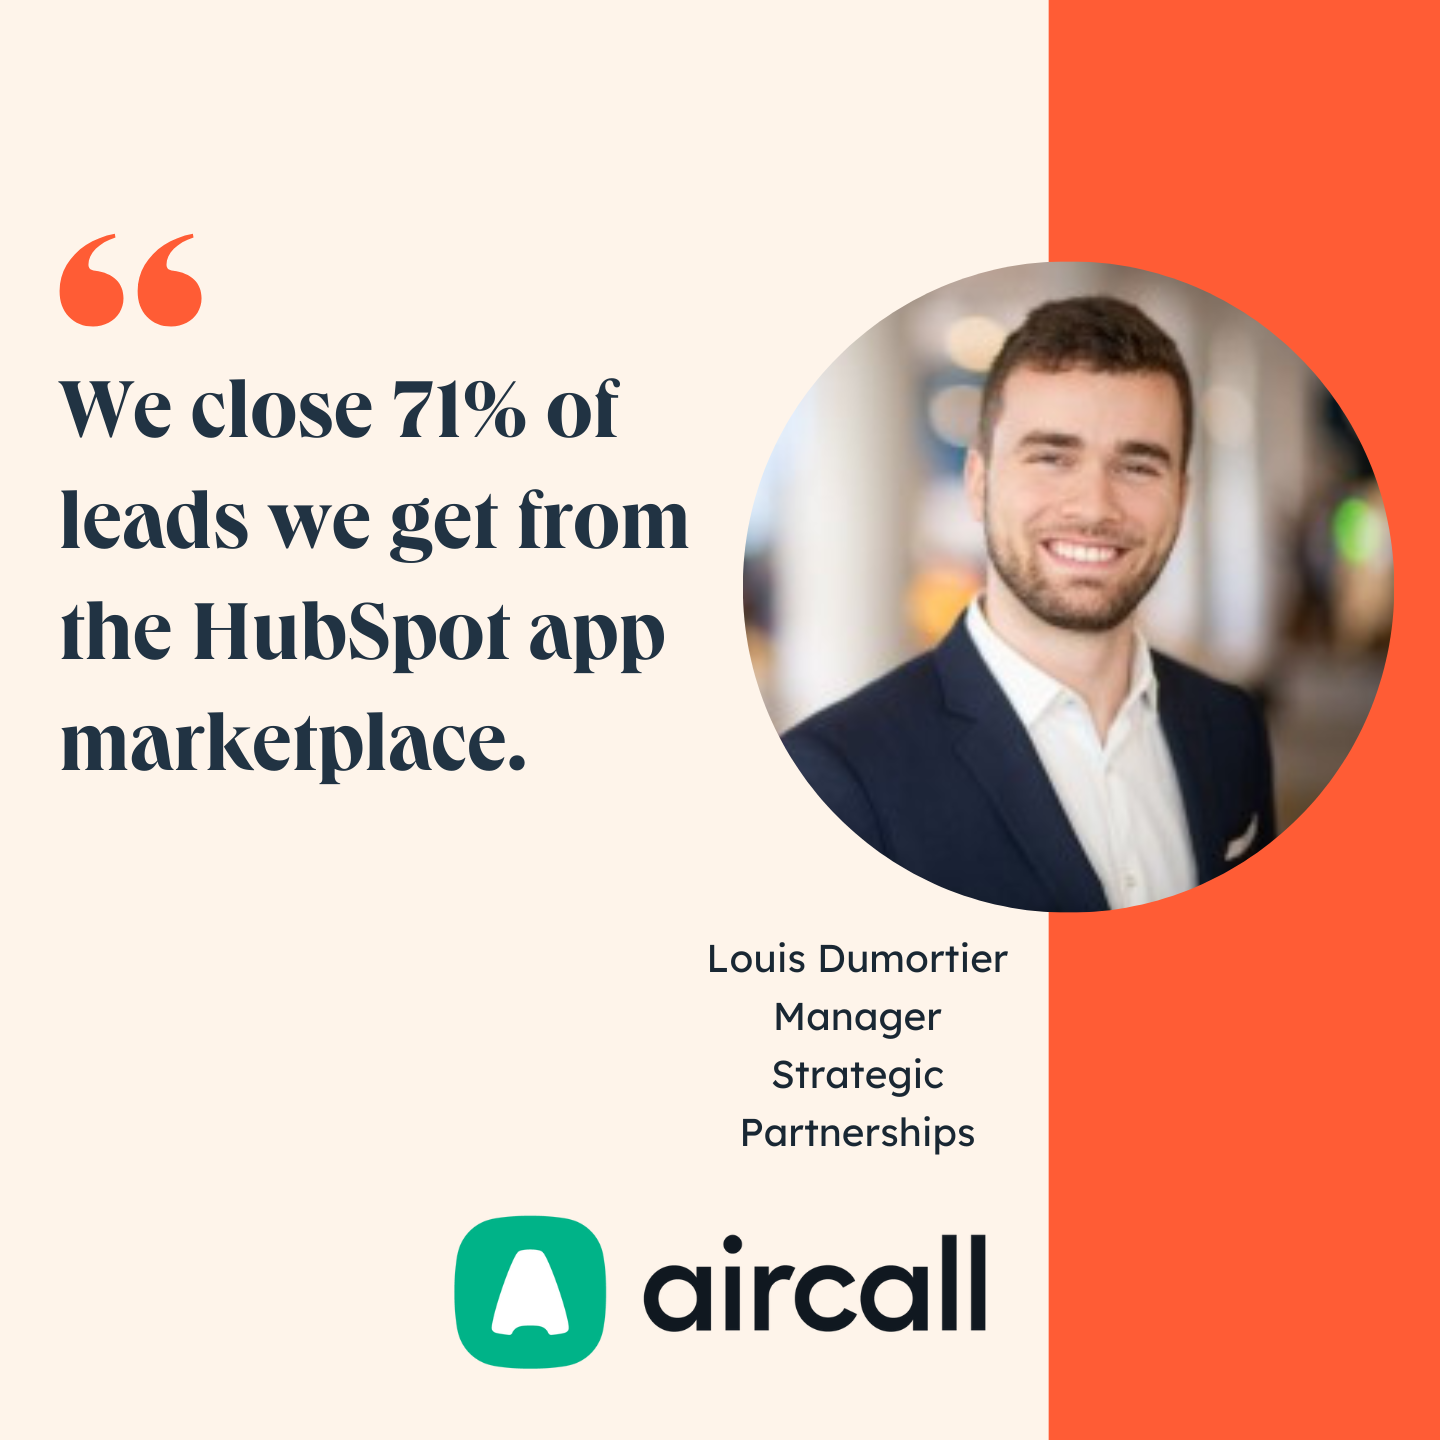 Aircall quote on closing marketplace leads